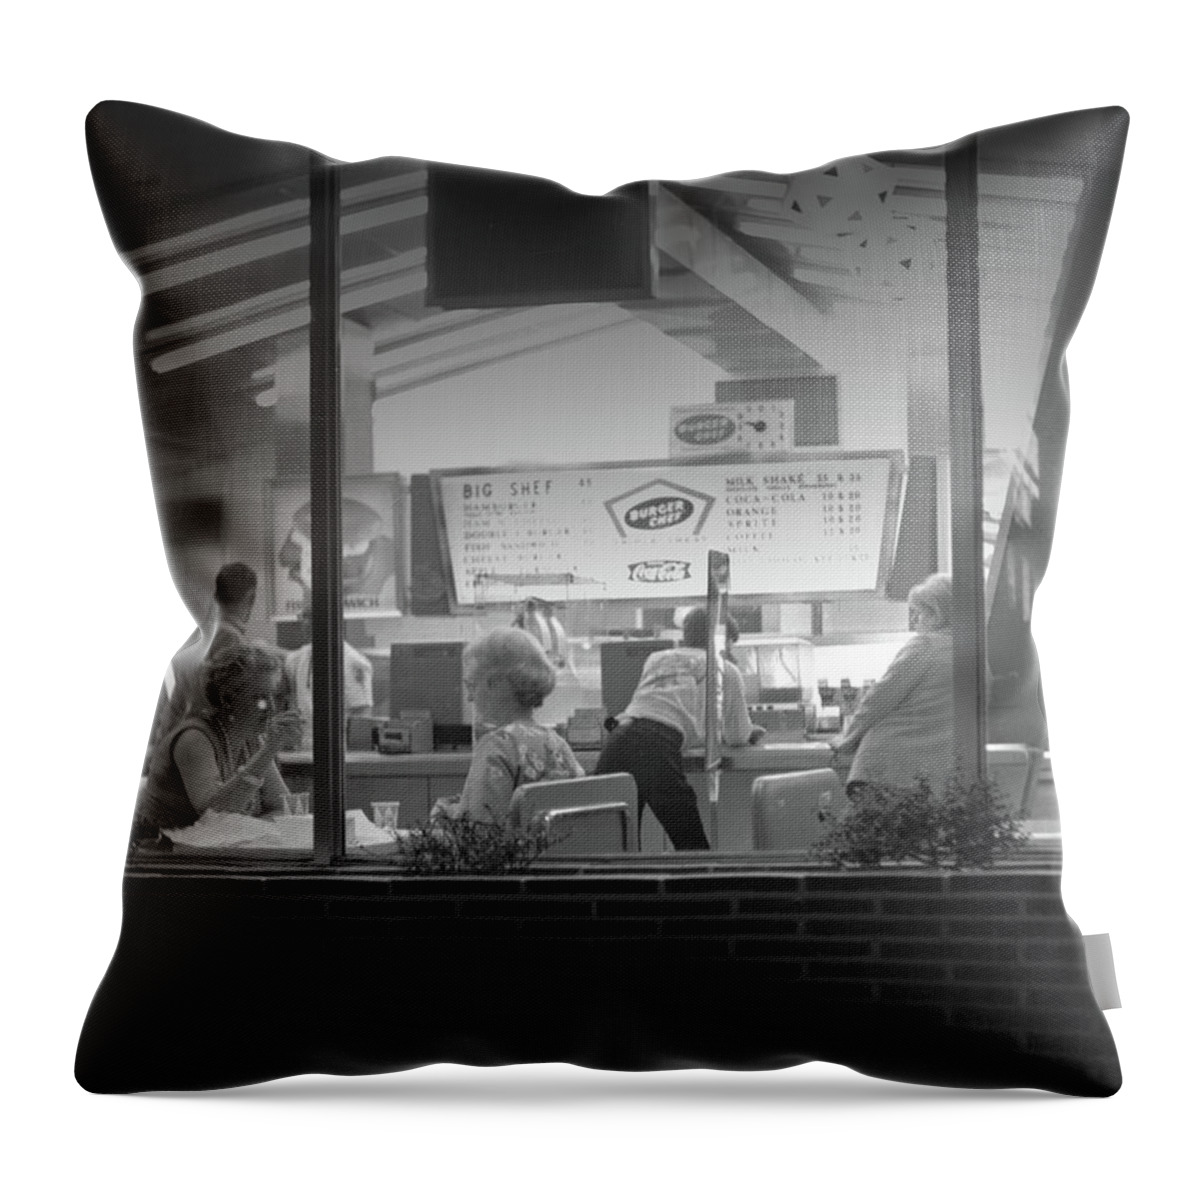 Macon Throw Pillow featuring the photograph Big Shef 49-cents #1 by John Simmons